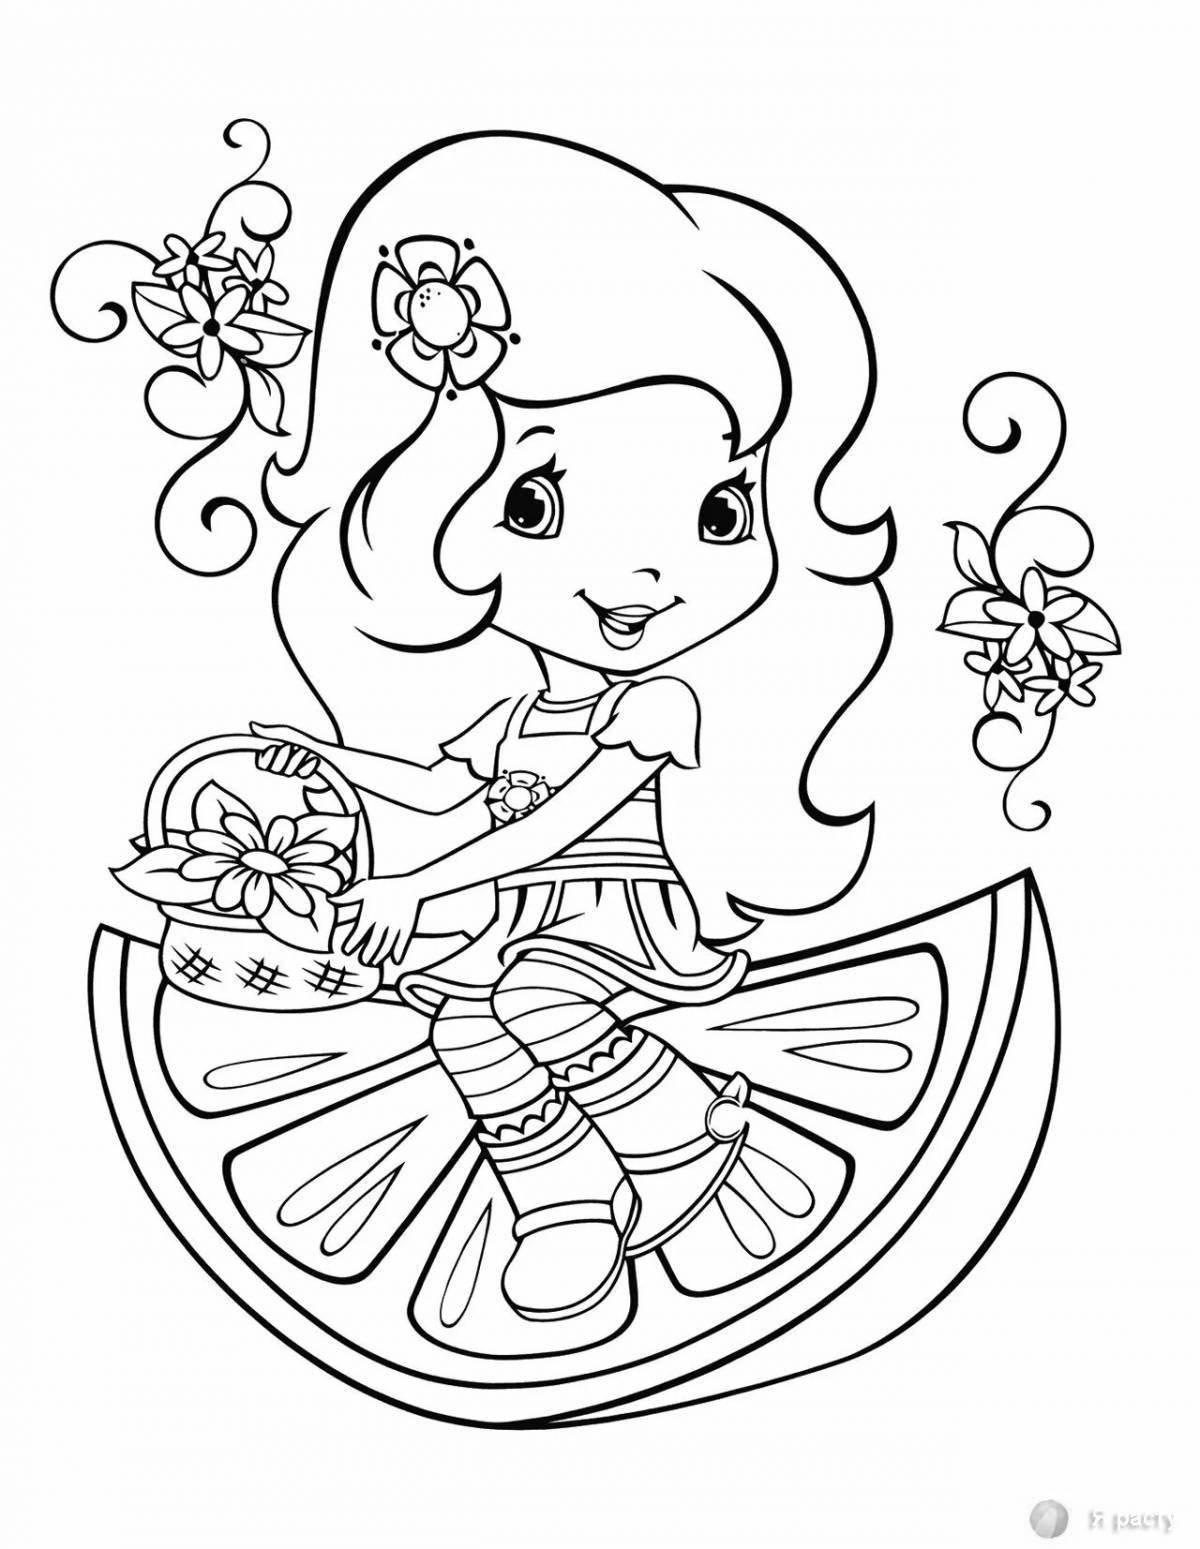 Coloring page glowing crimson girl